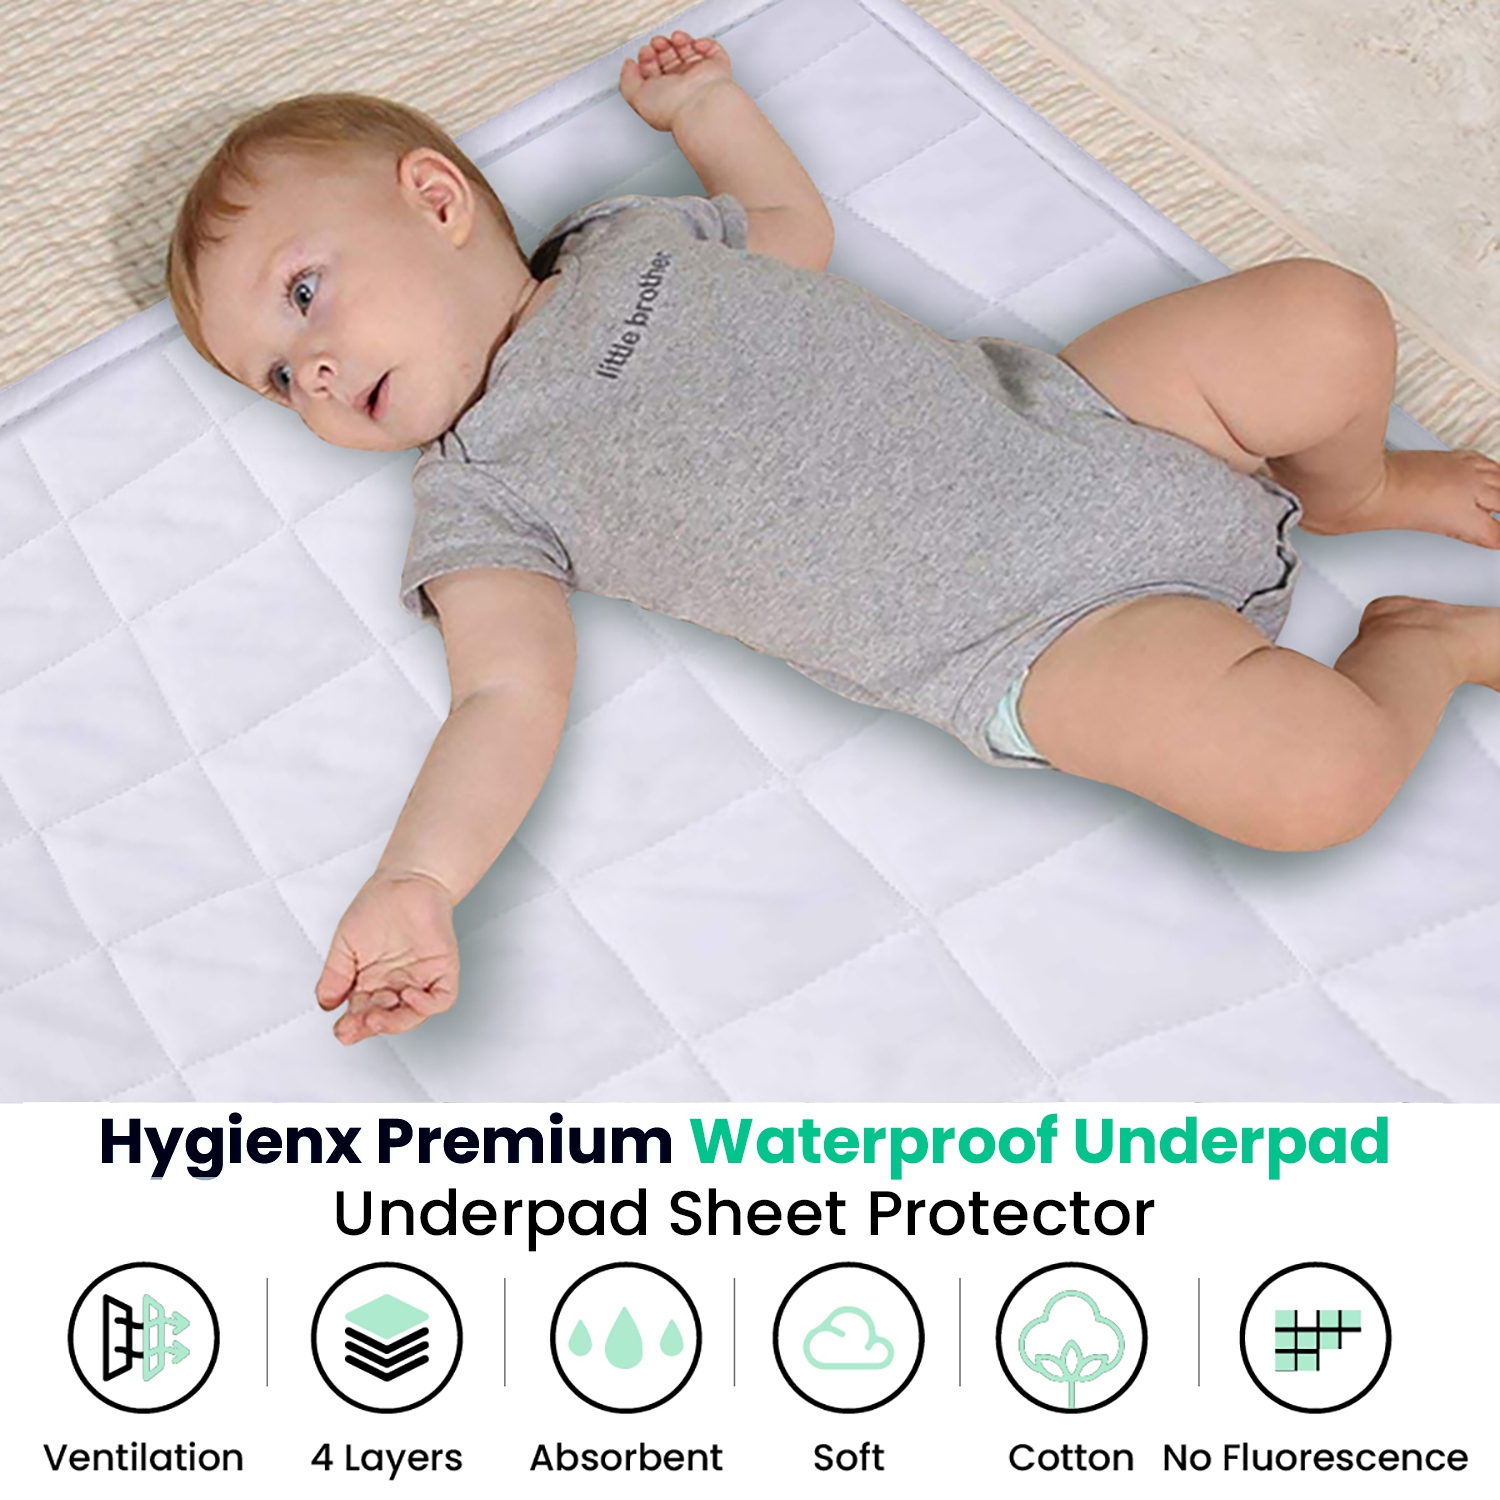 HYGIENX Deluxe Waterproof Sheet Protector 24”x34” 4 Pack 5 Layer Protection  Soaker Bed Pads Reusable Incontinence UnderPads for Adults Kids Pets  Seniors Children Mattress Protector Green